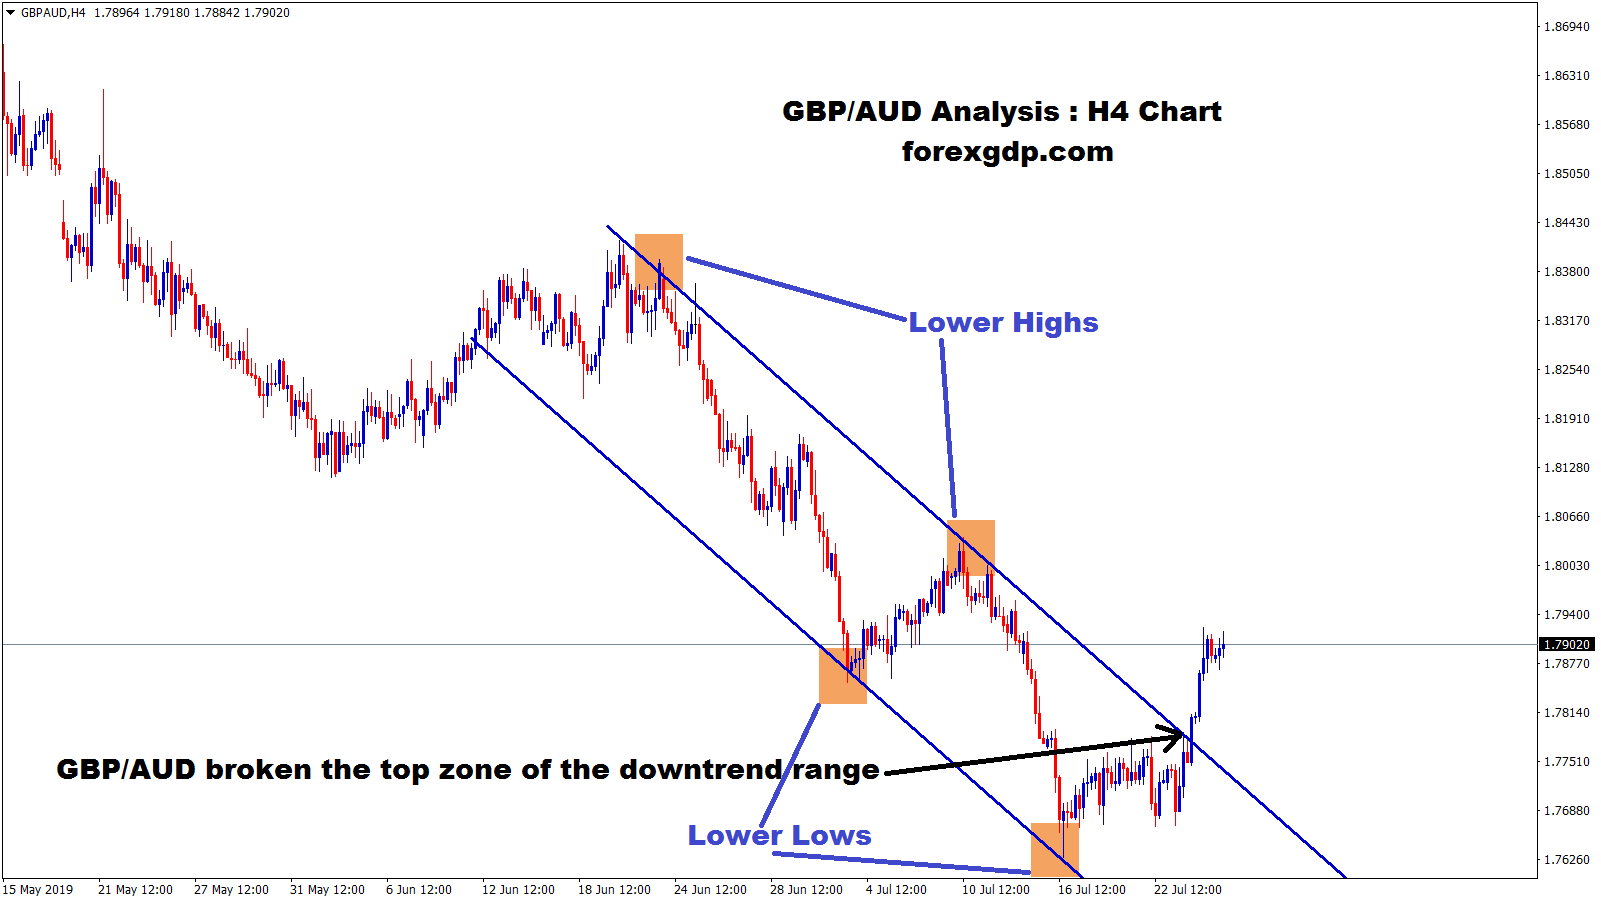 GBP/AUD broken the top and moving in an Downtrend Channel